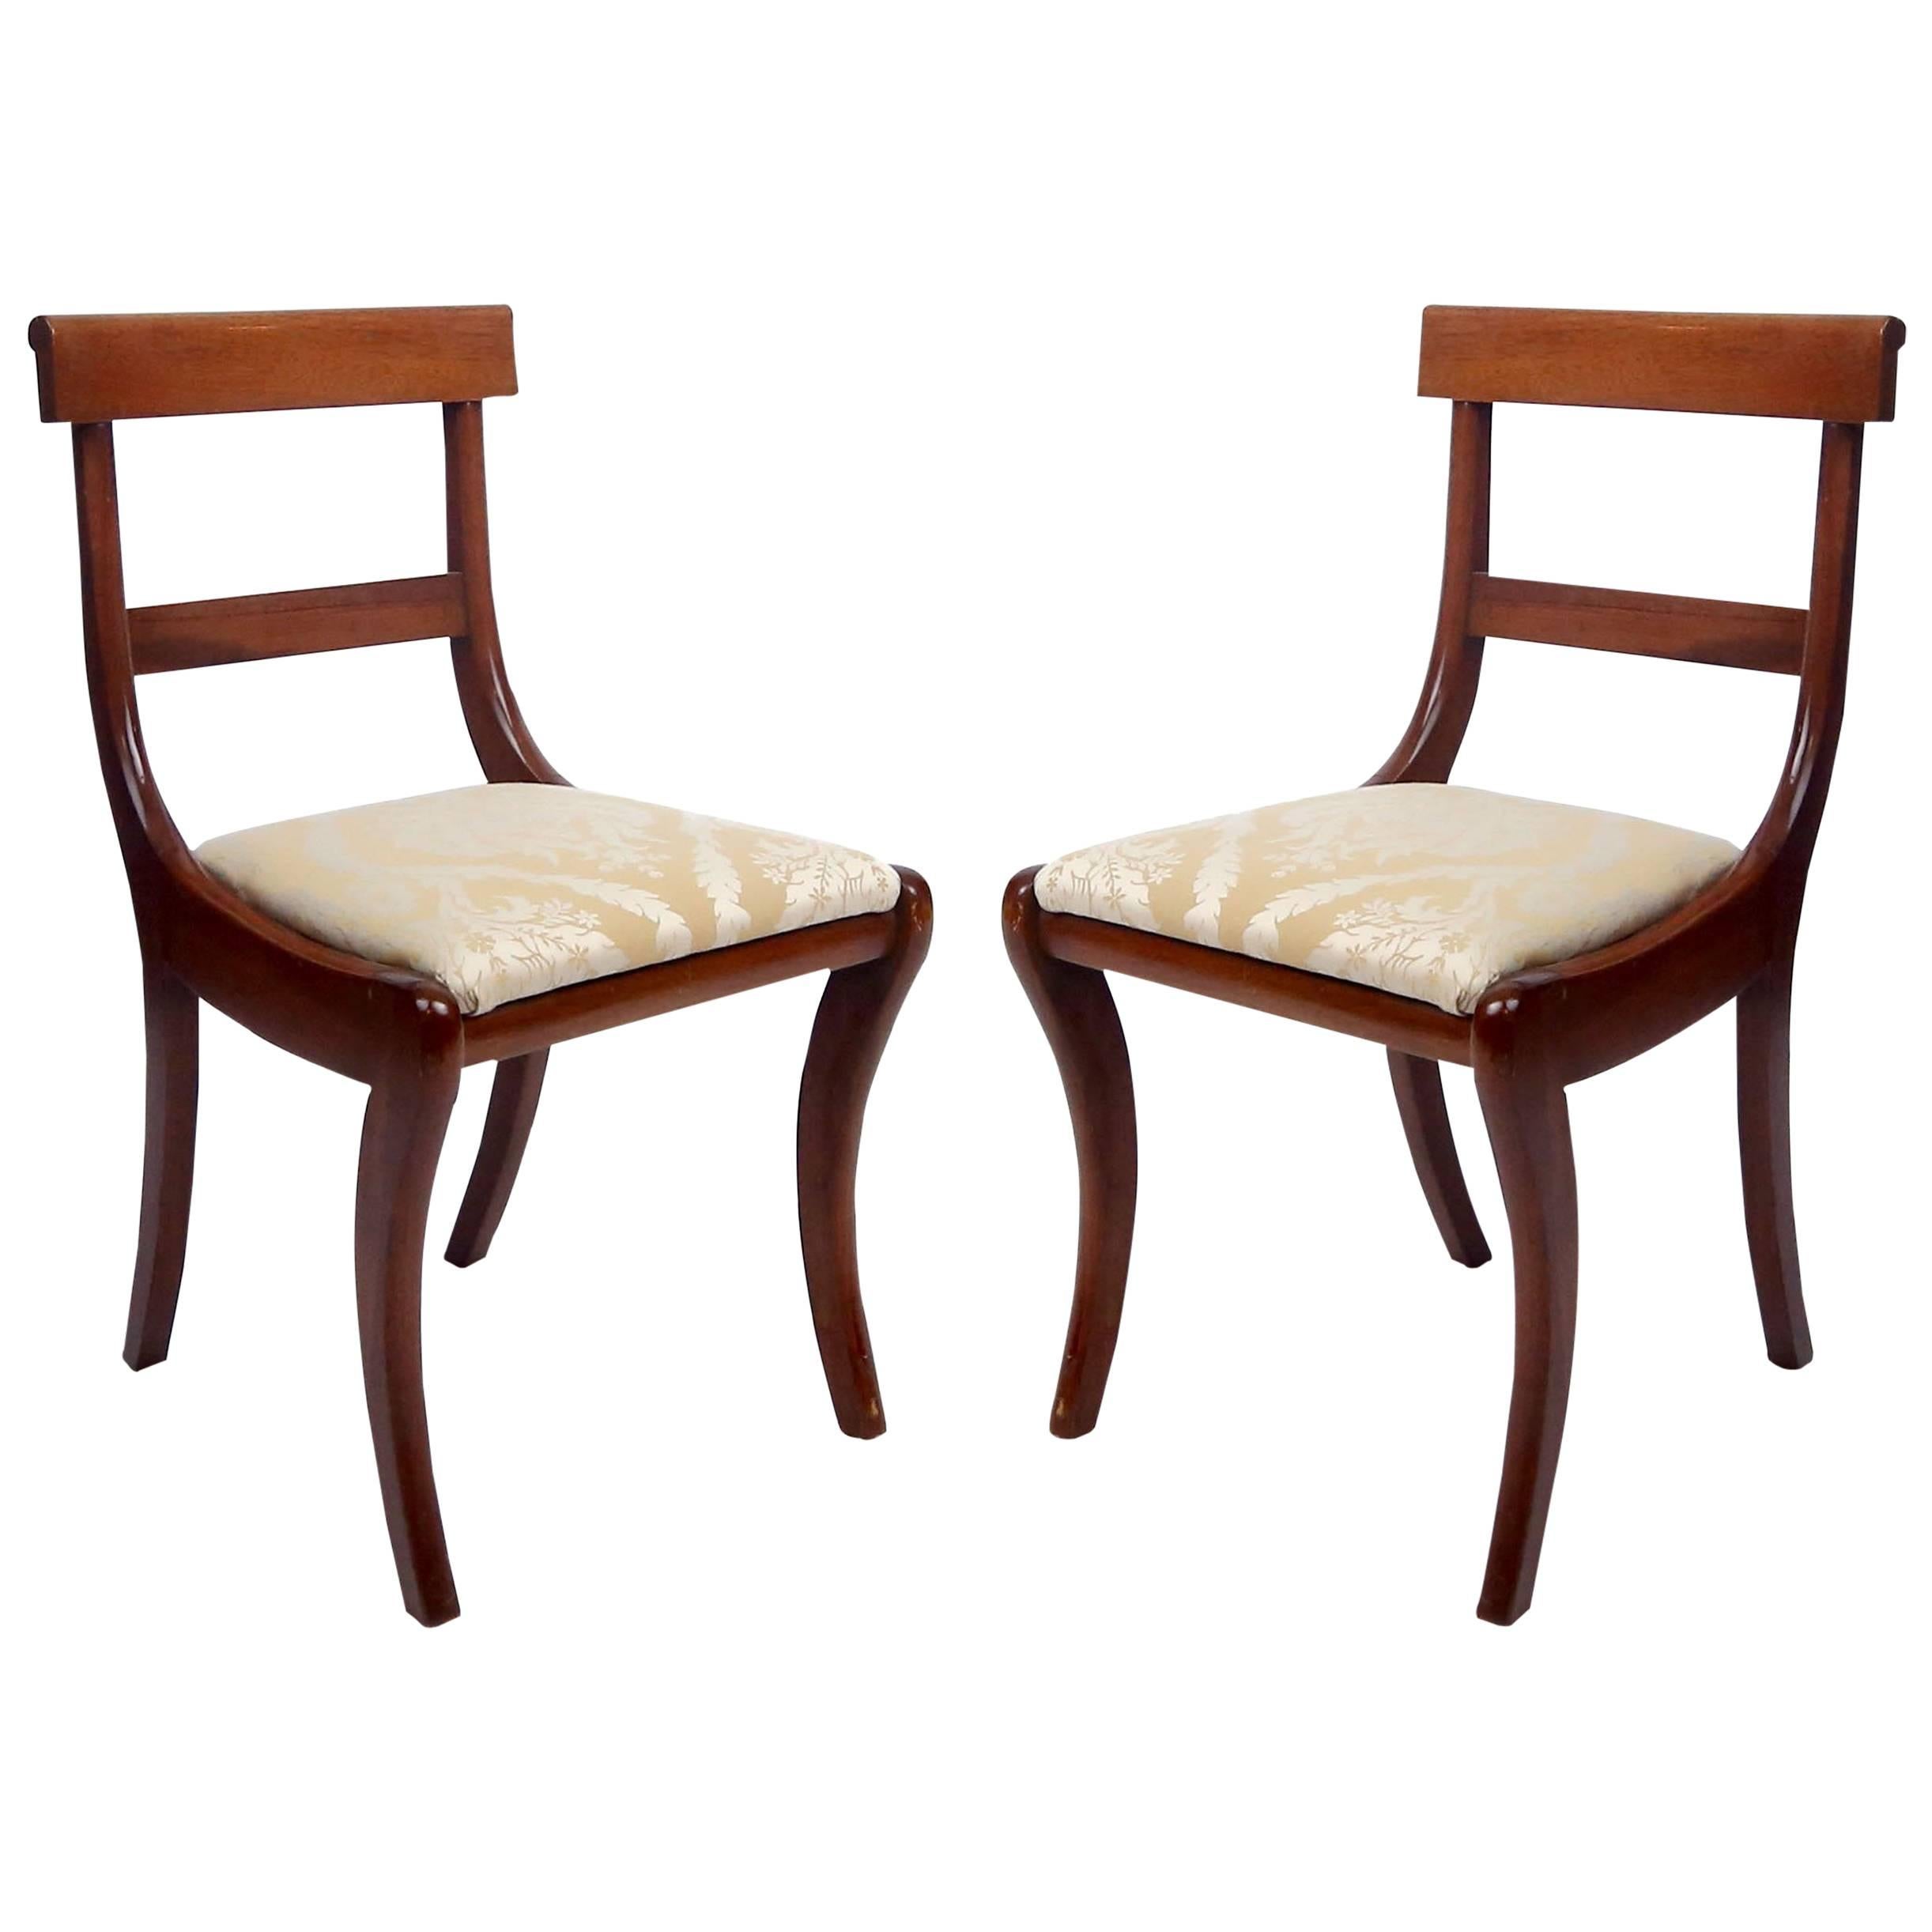 Pair of Early 20th Century Regency Mahogany Klismos Chairs in Gold Damask